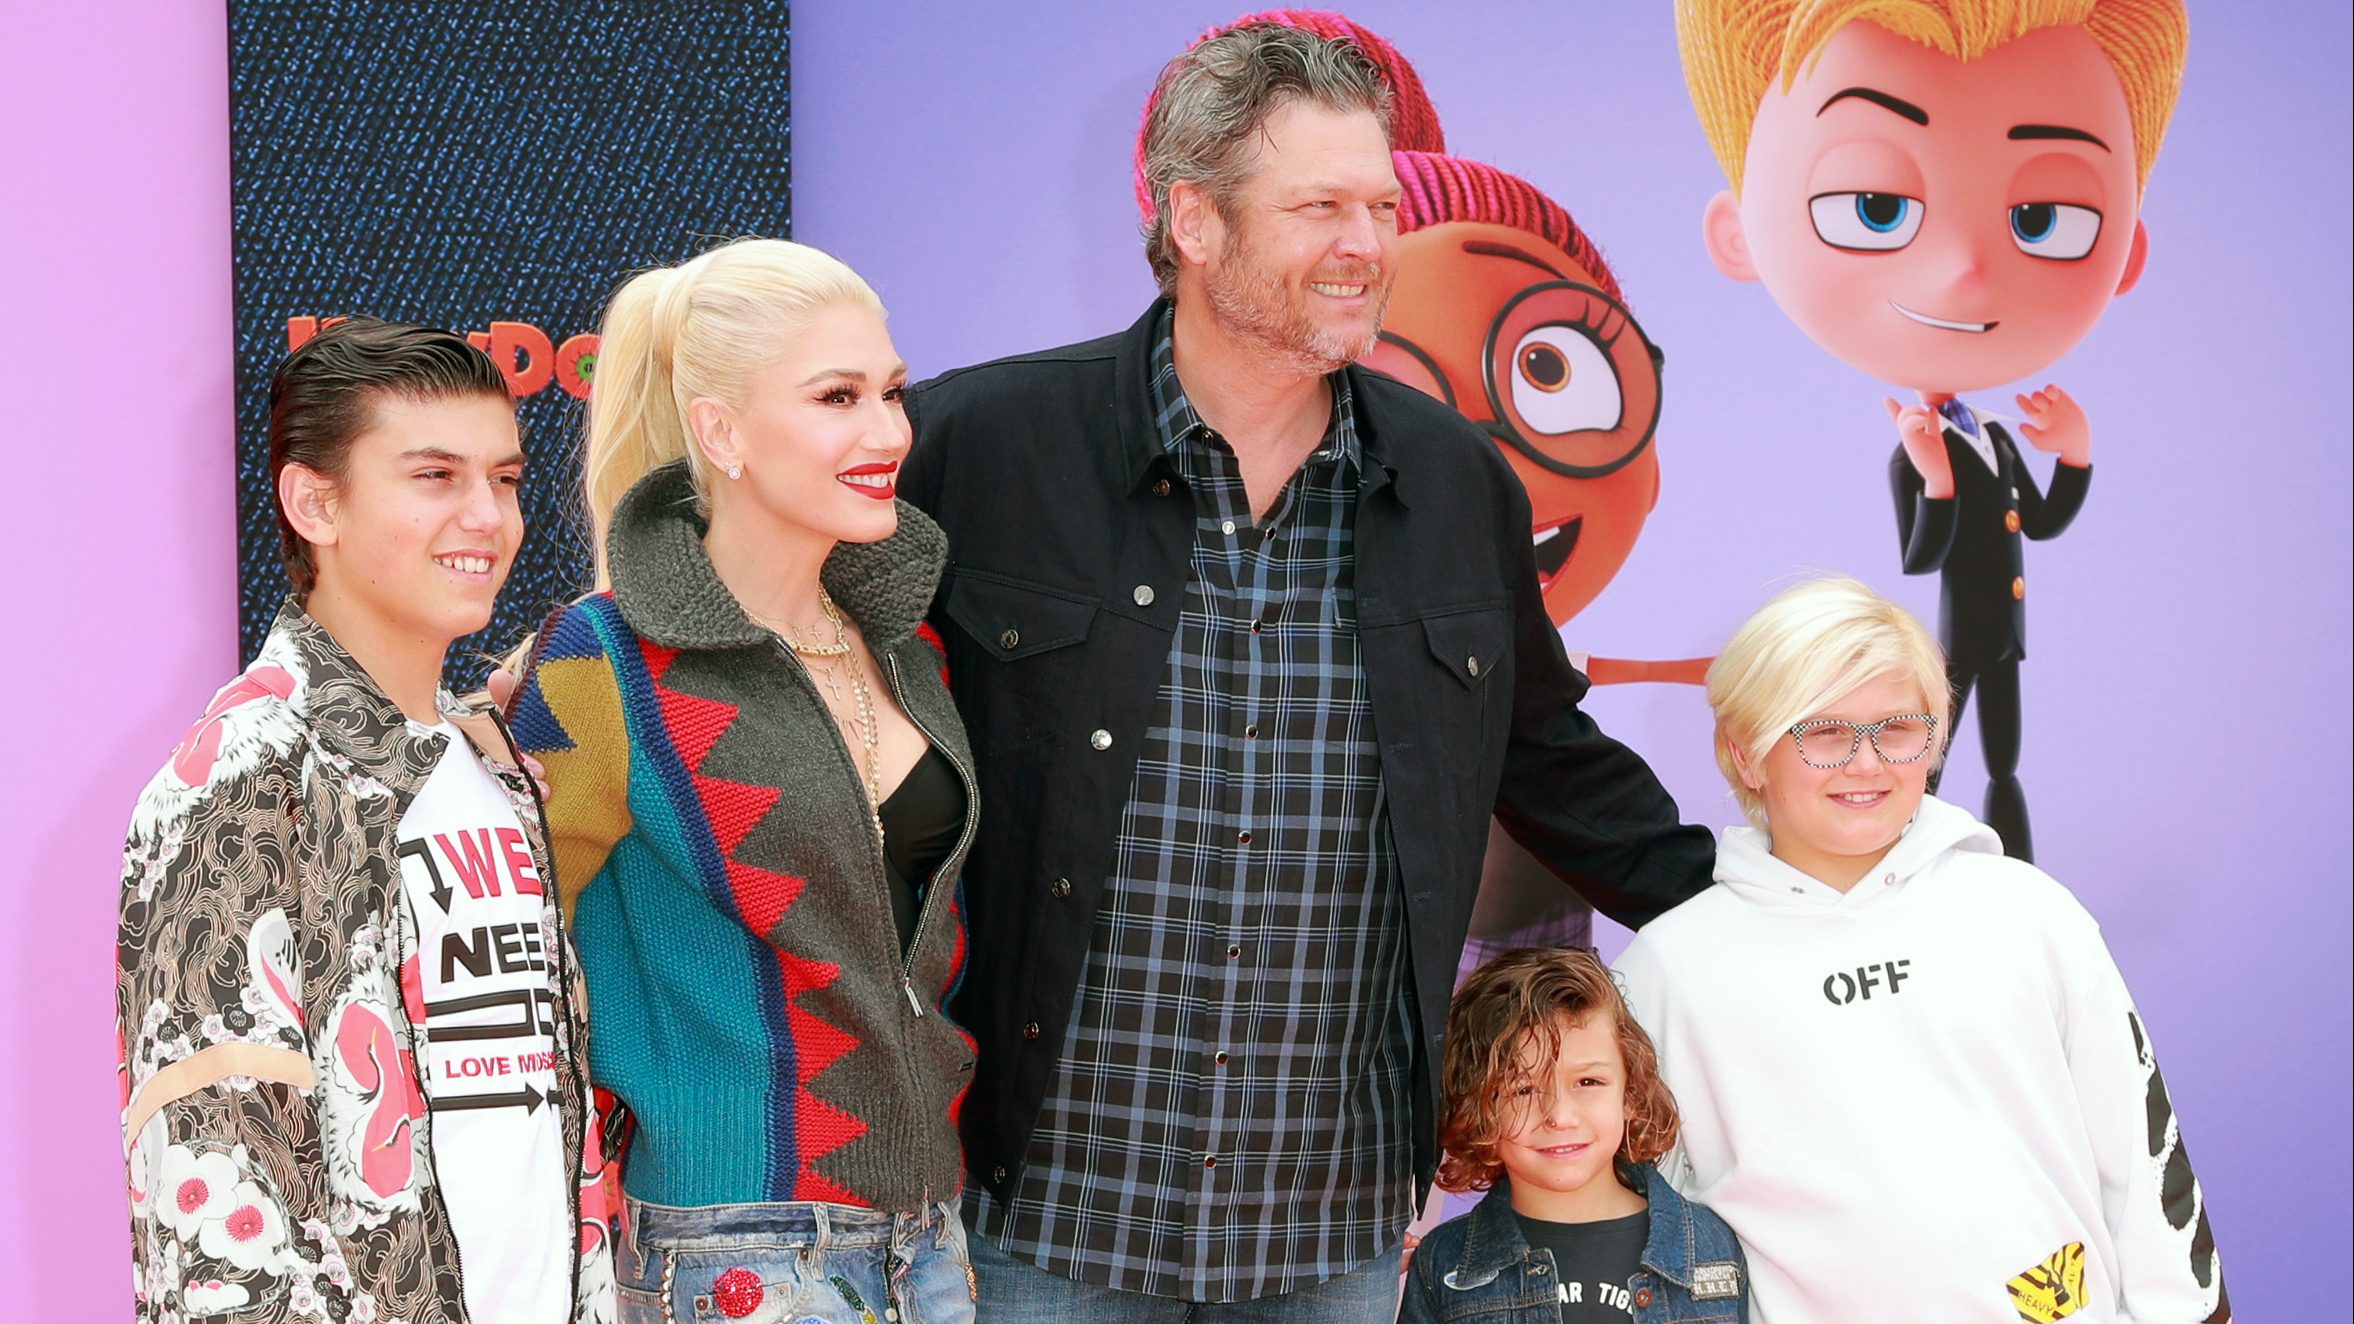 Gwen Stefani's Kids & Family 5 Fast Facts You Need to Know